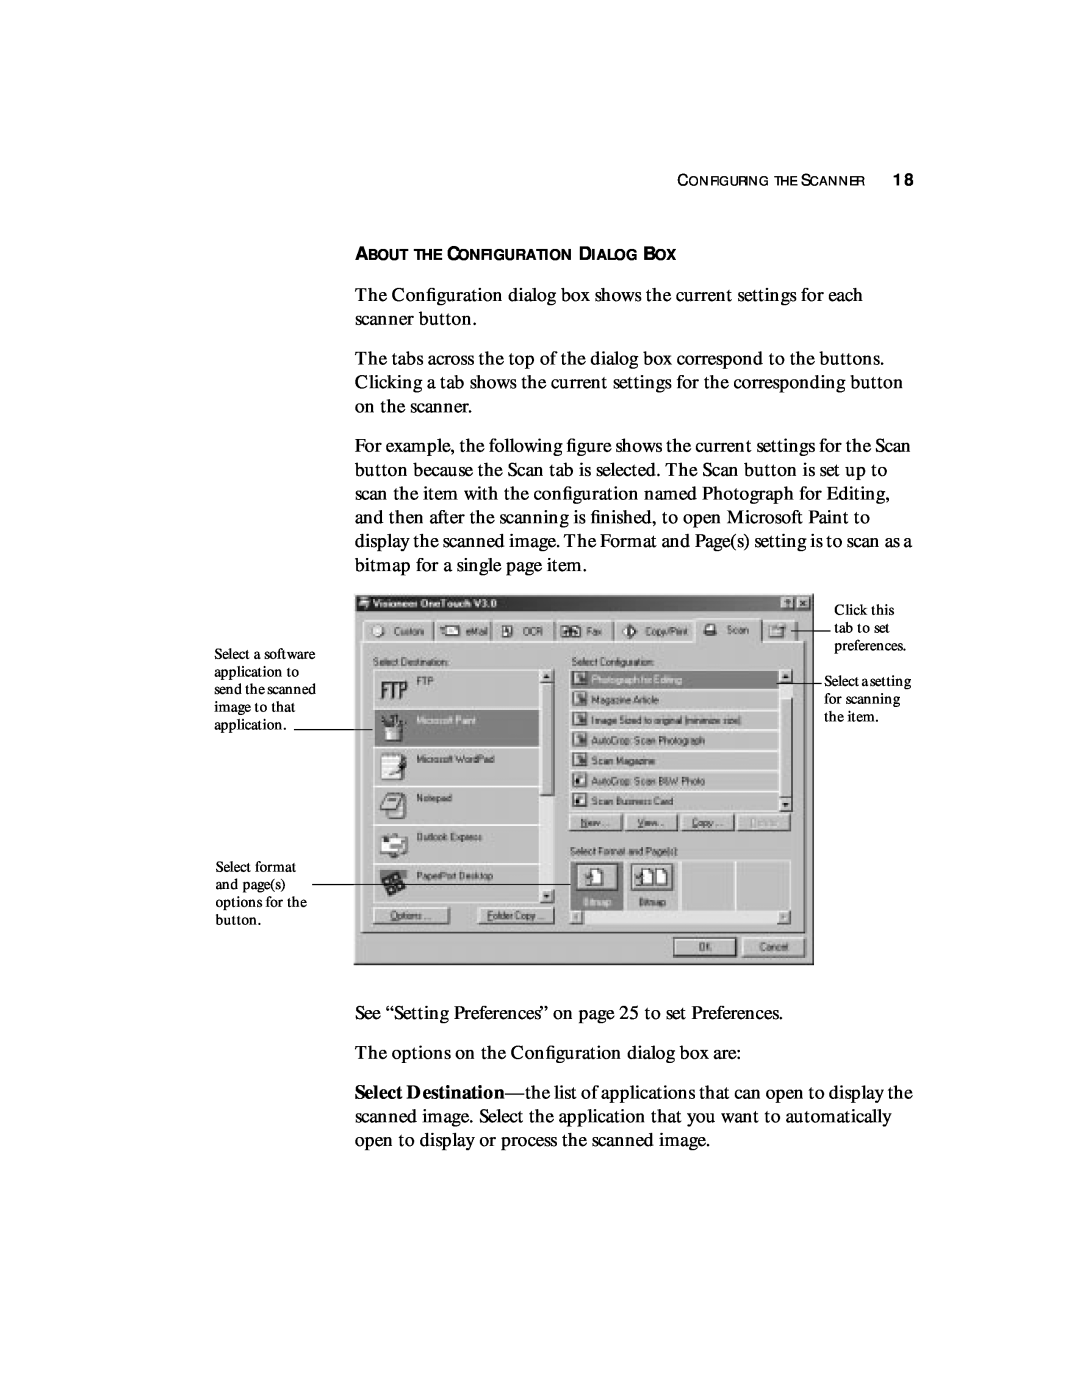 Visioneer 8900 manual About The Configuration Dialog Box 